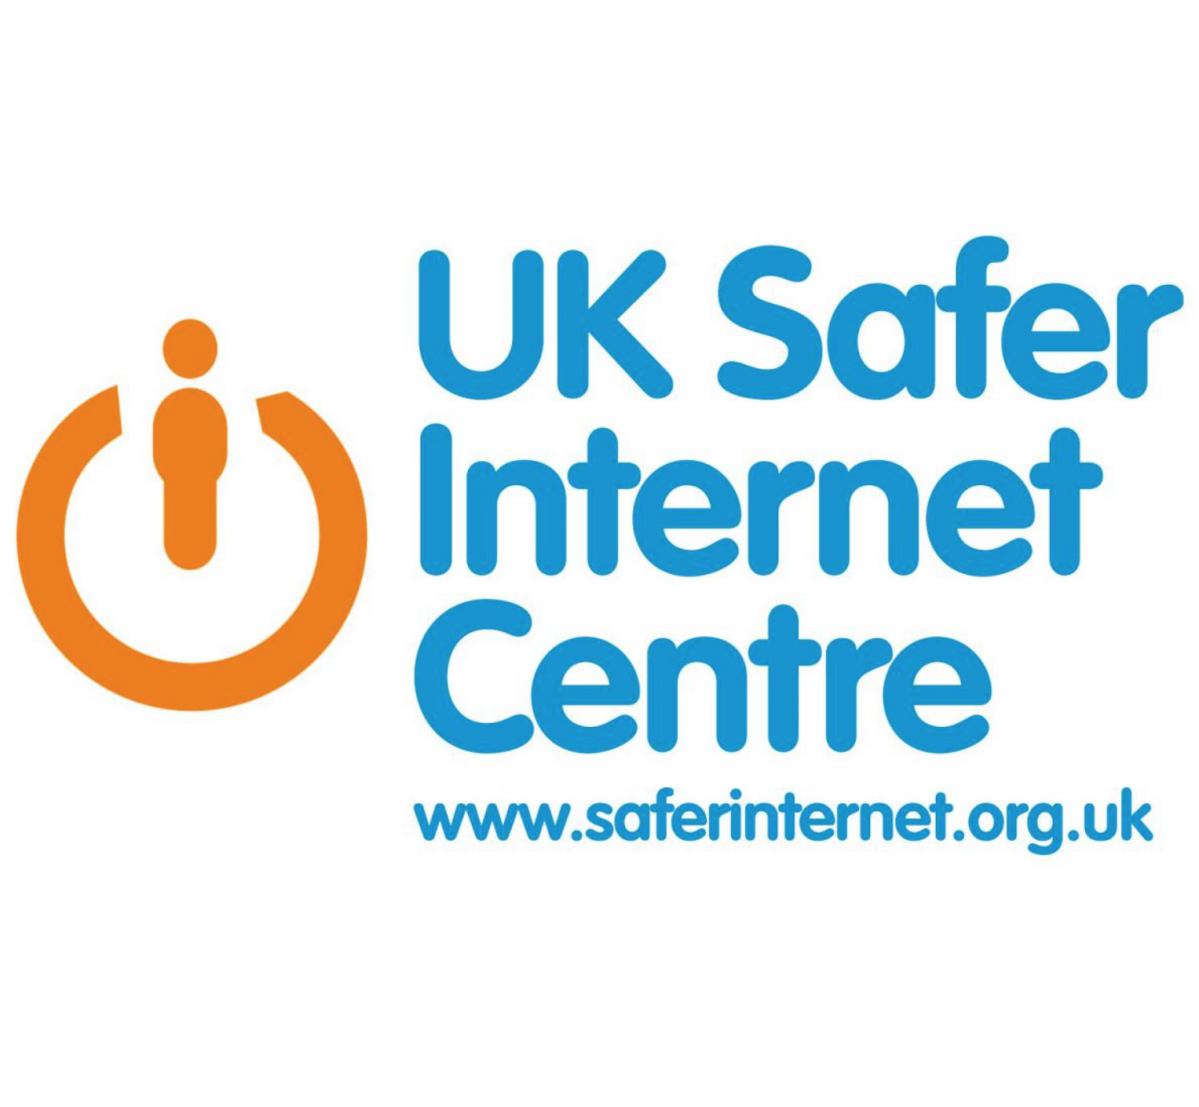 The UK Safer Internet Centre has made guides for parents to find out more about the safety features available on popular social networks.